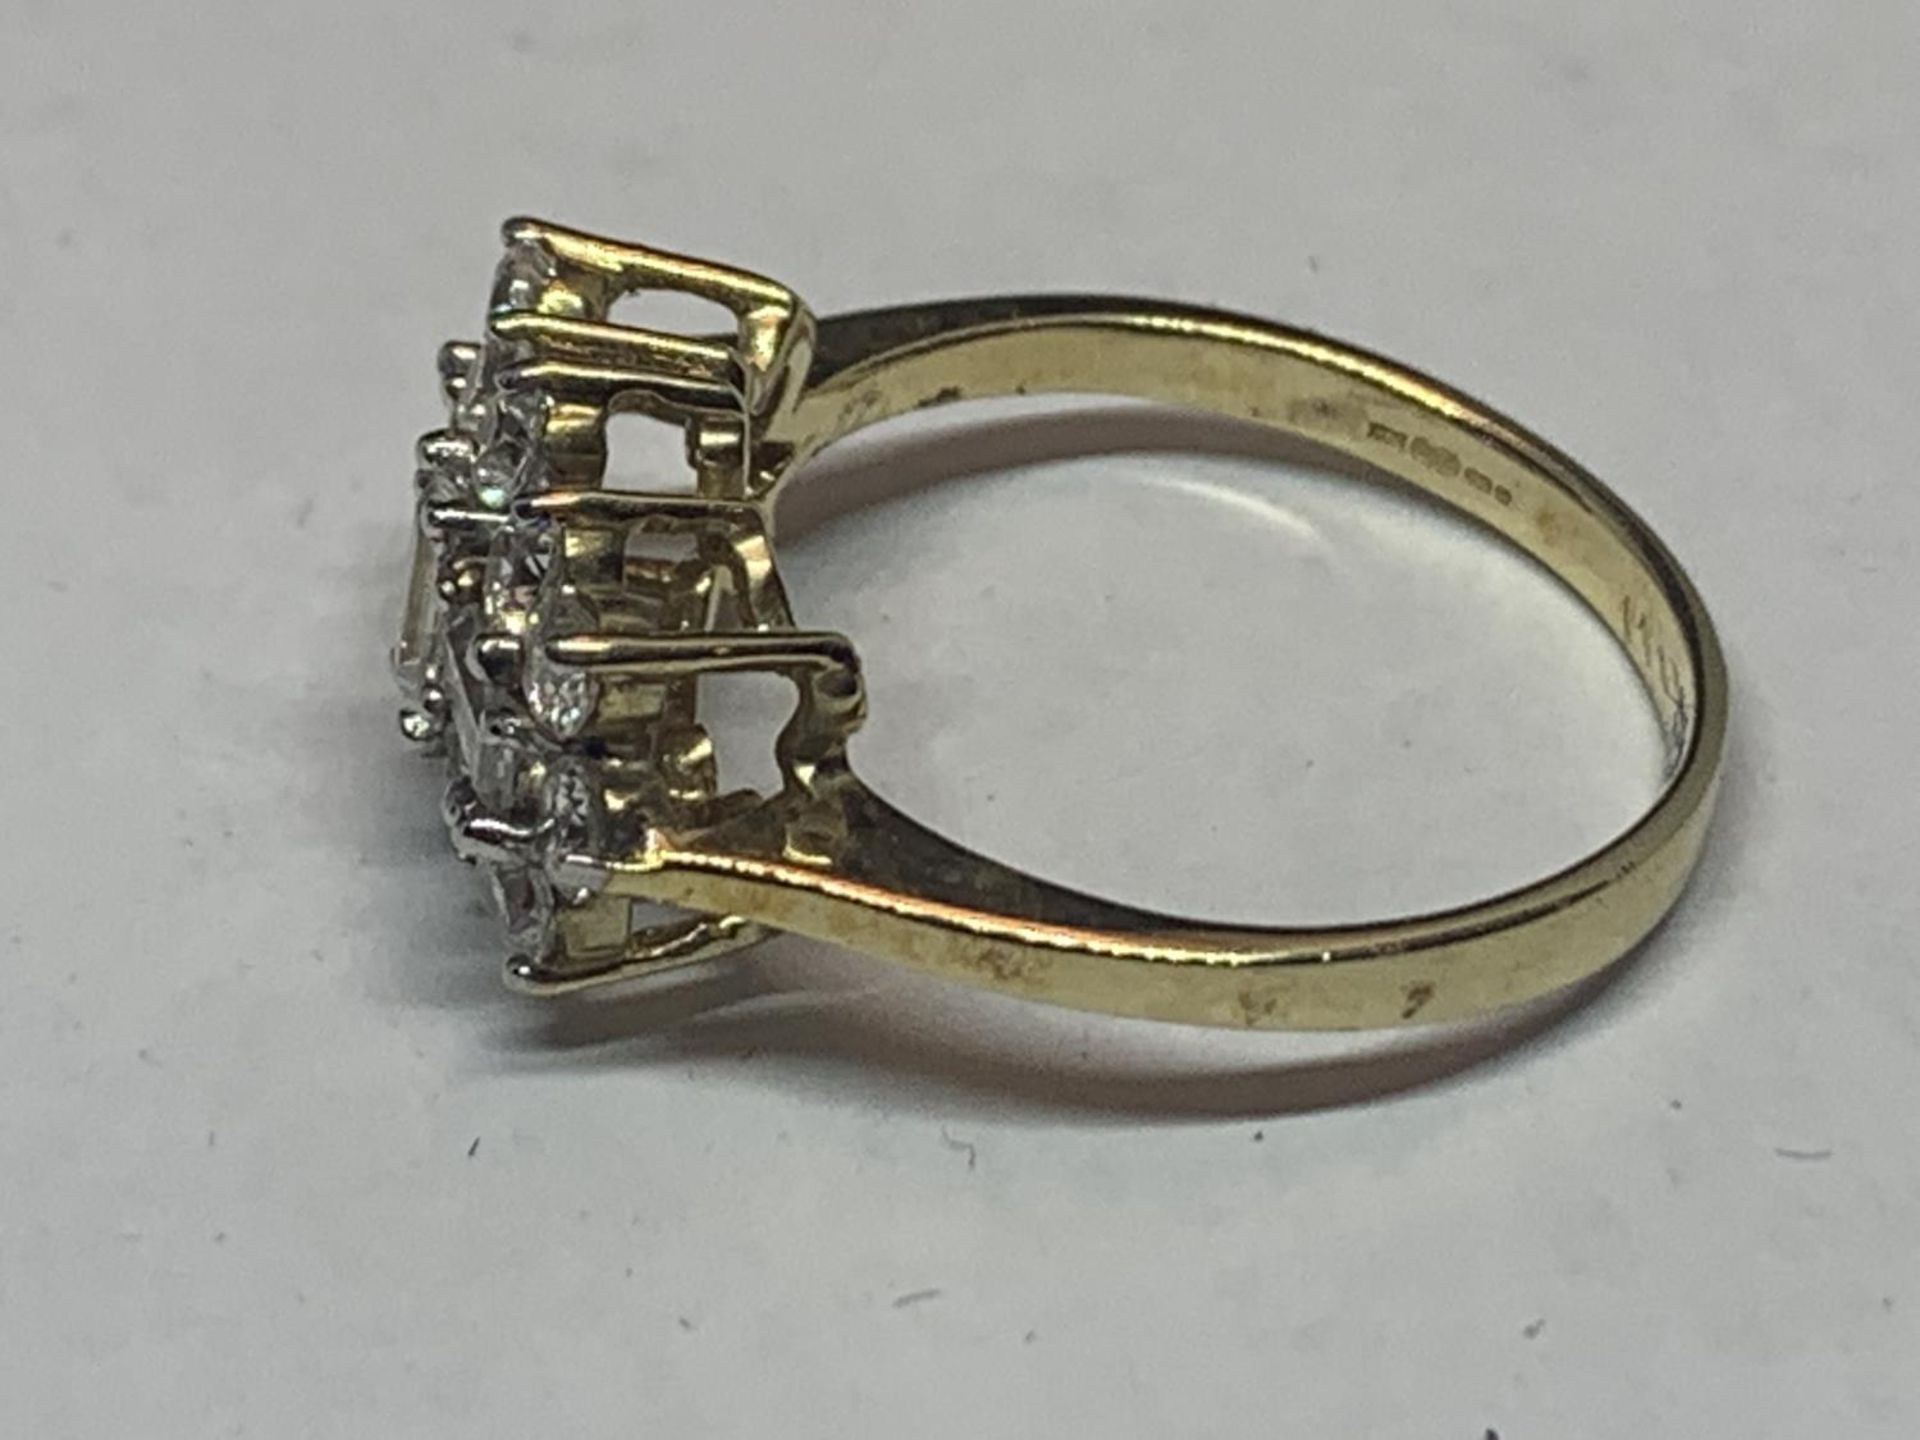 A 9 CARAT GOLD RING WITH CLEAR STONES SIZE N/O GROSS WEIGHT 3 GRAMS IN A PRESENTATION BOX - Image 2 of 4